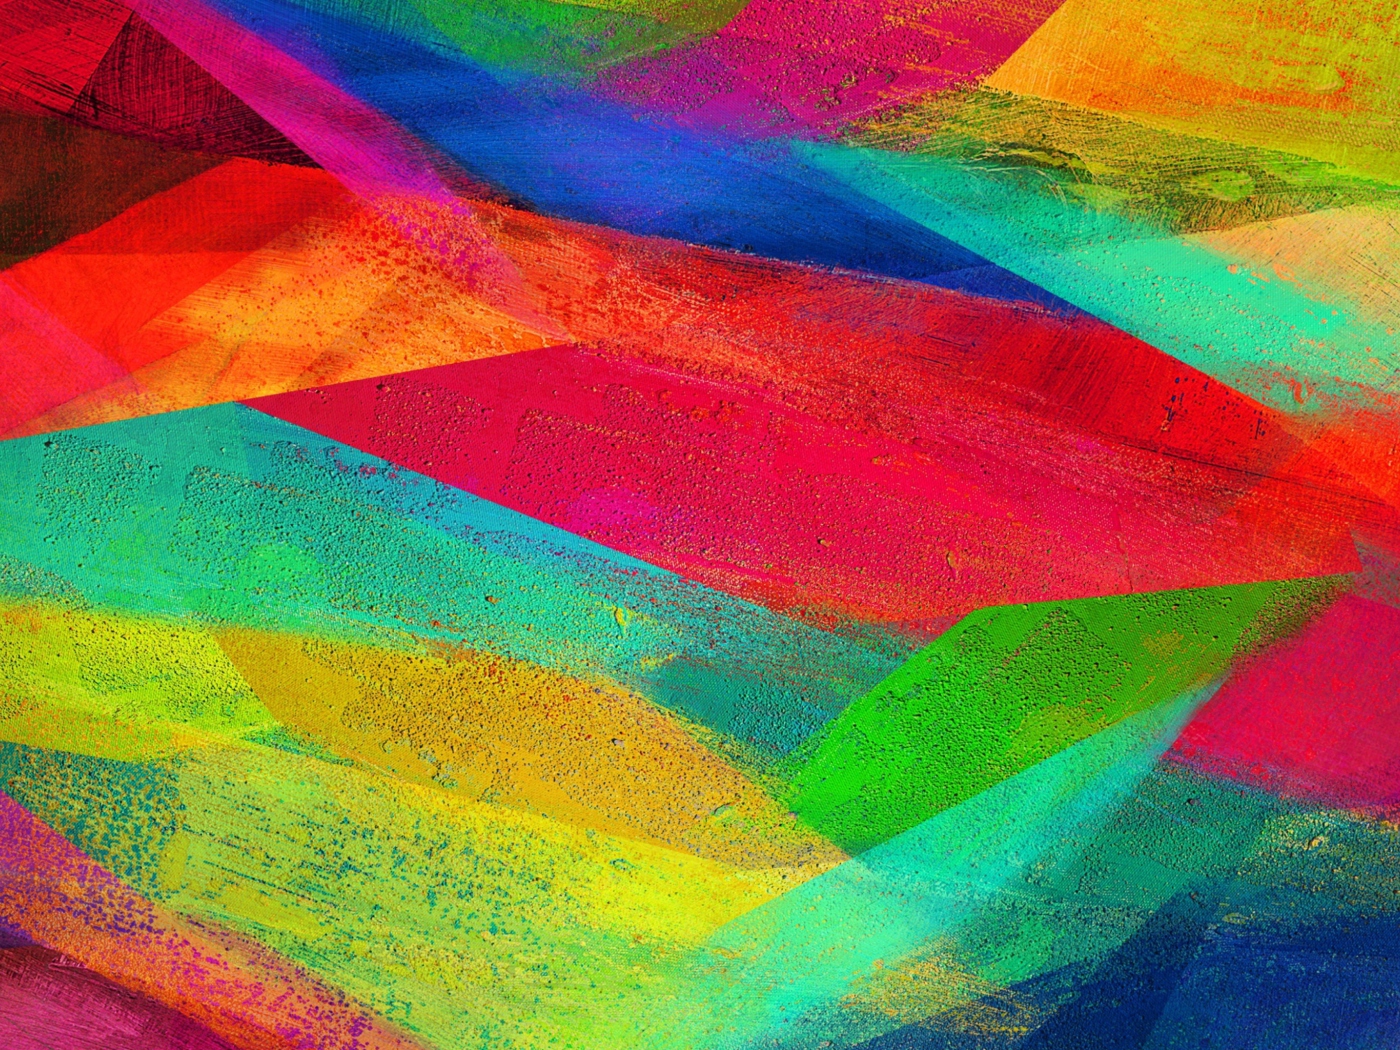 Colorful Samsung Galaxy Note 4 wallpaper 1400x1050